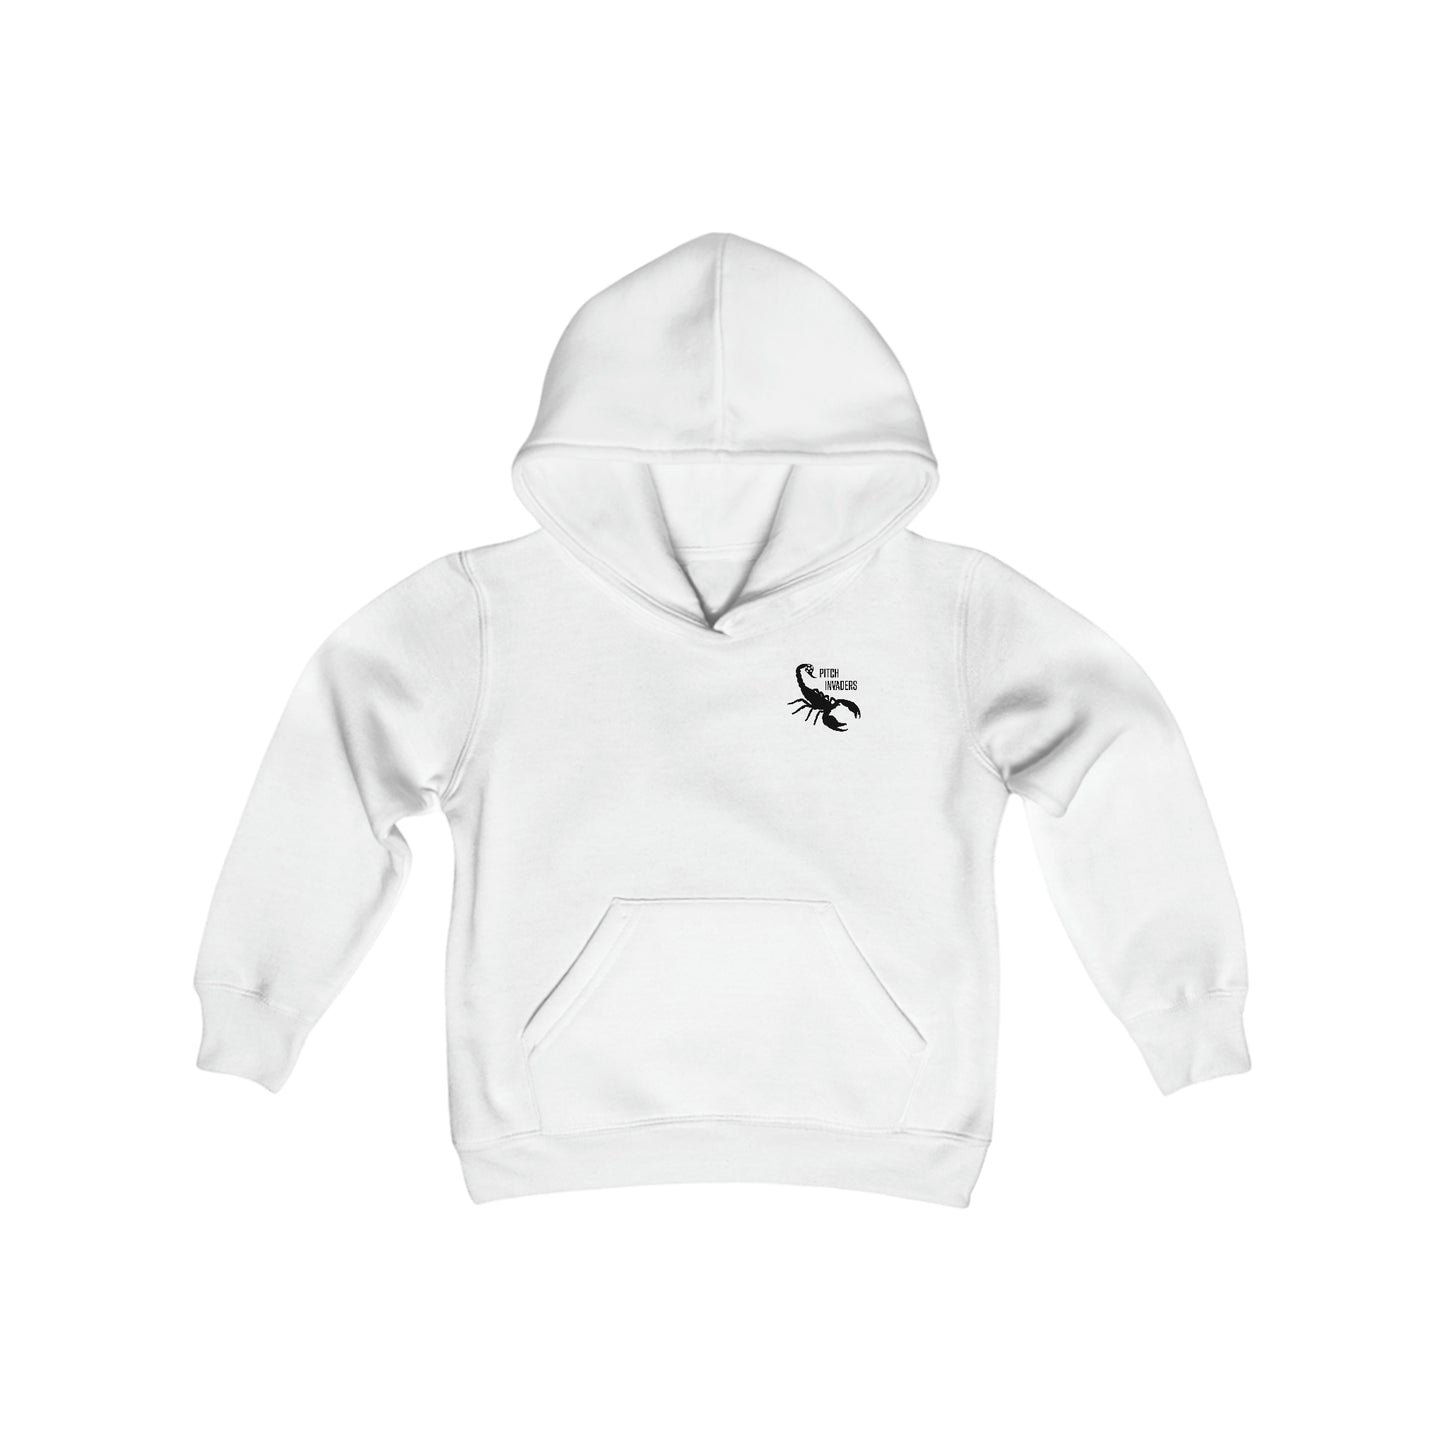 THE PITCH IS FOR THE PEOPLE Youth Hoodie (Unisex)